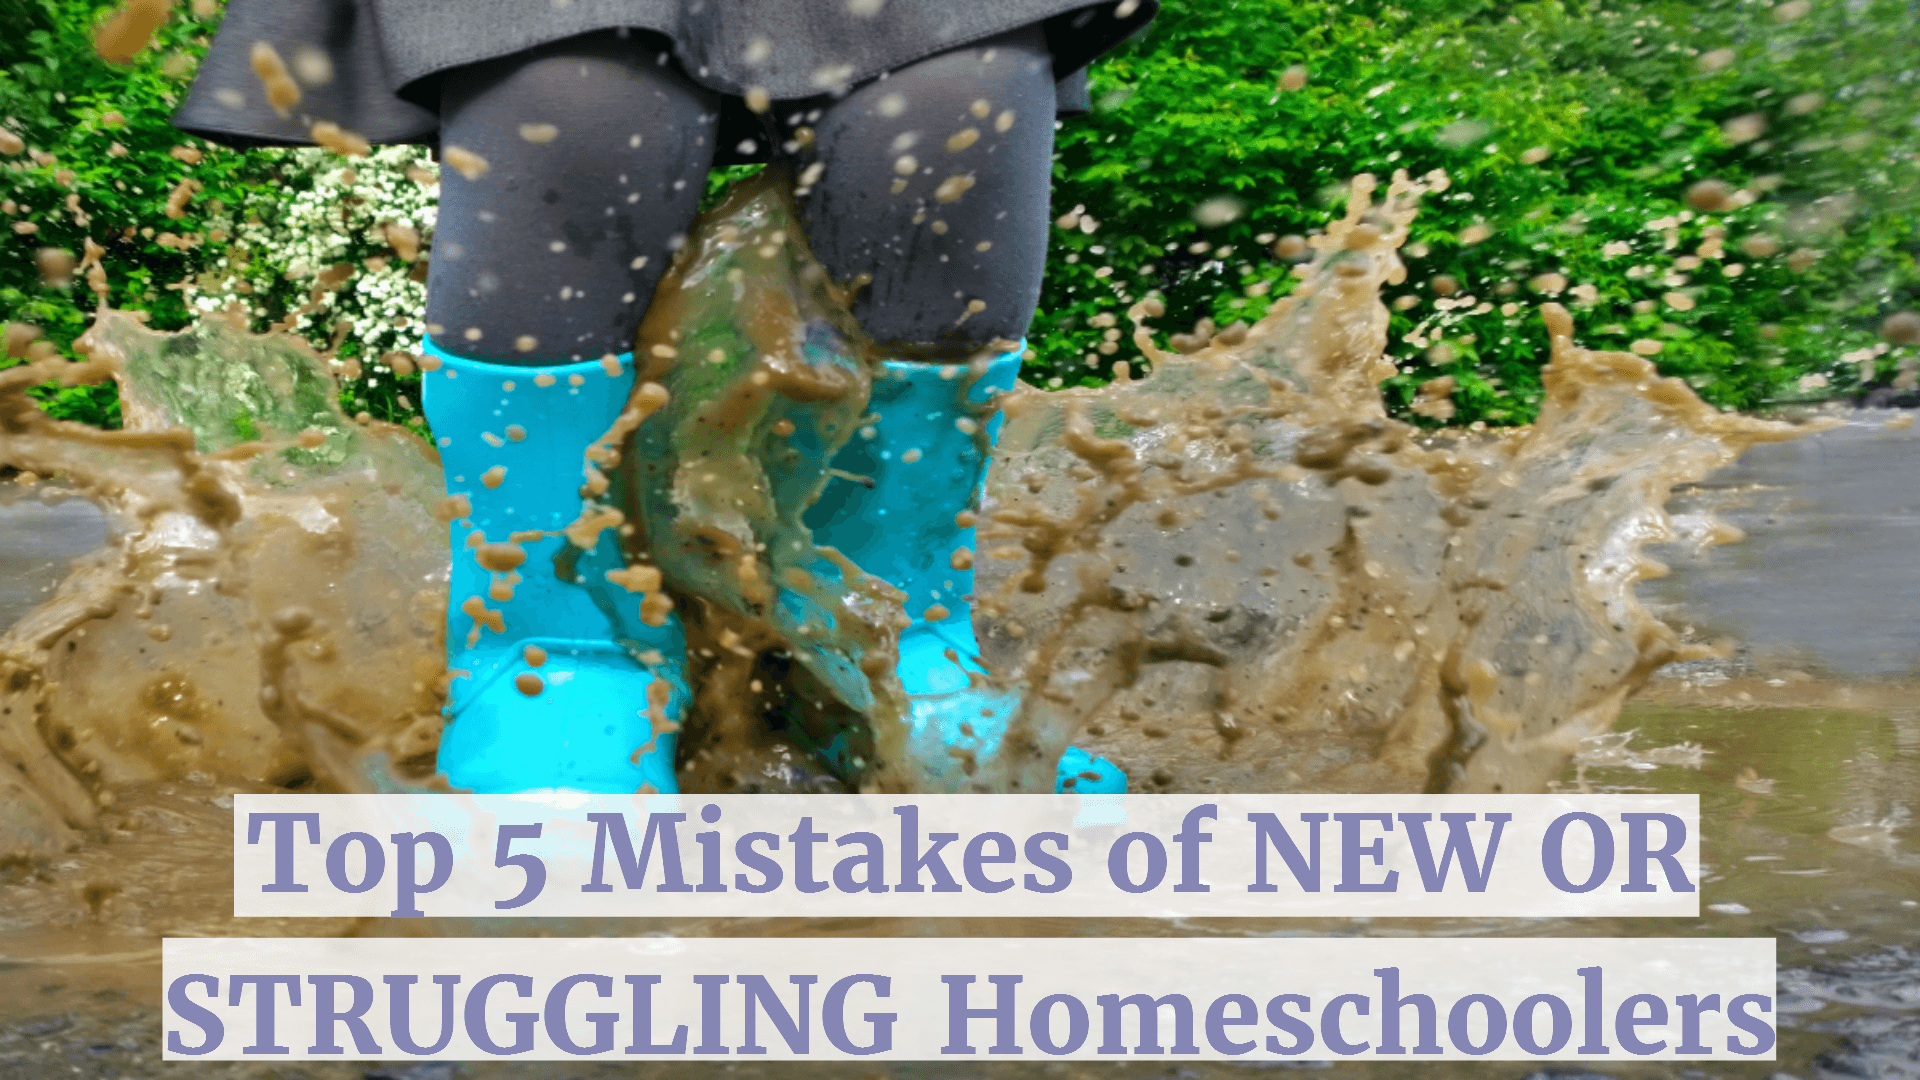 5 Top Mistakes of New or Struggling Homeschoolers